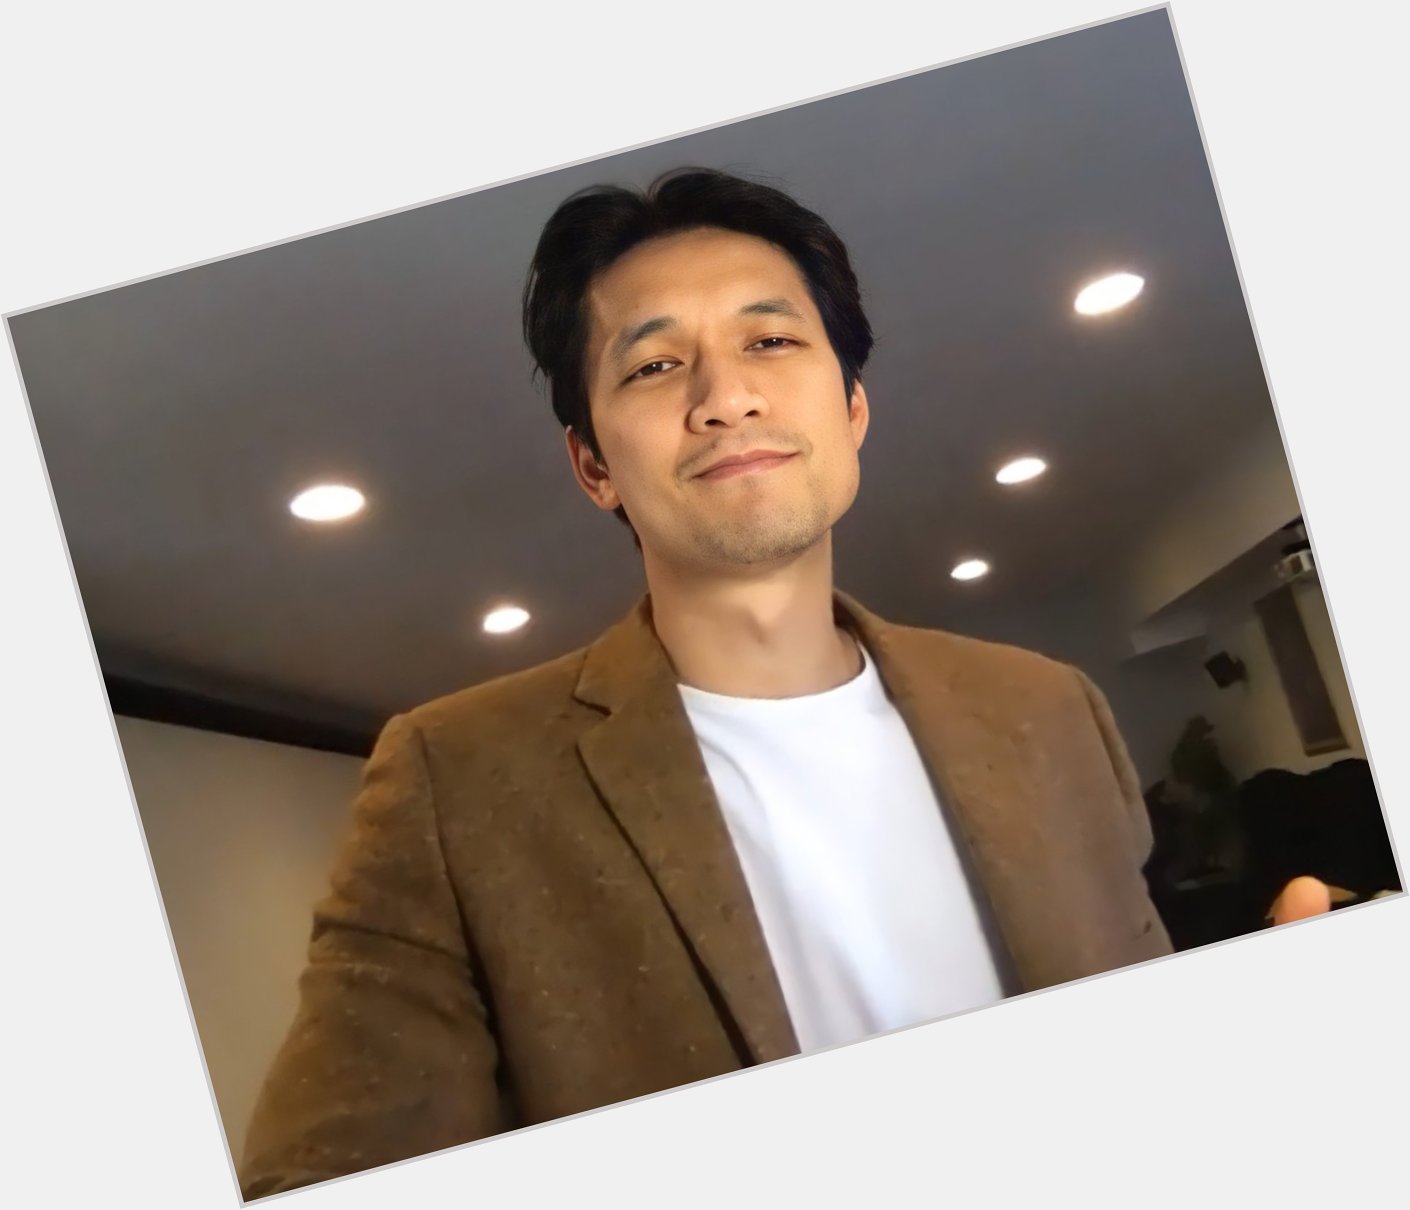 Happy birthday to the one and only: harry shum jr! I hope you will have amazing day king 